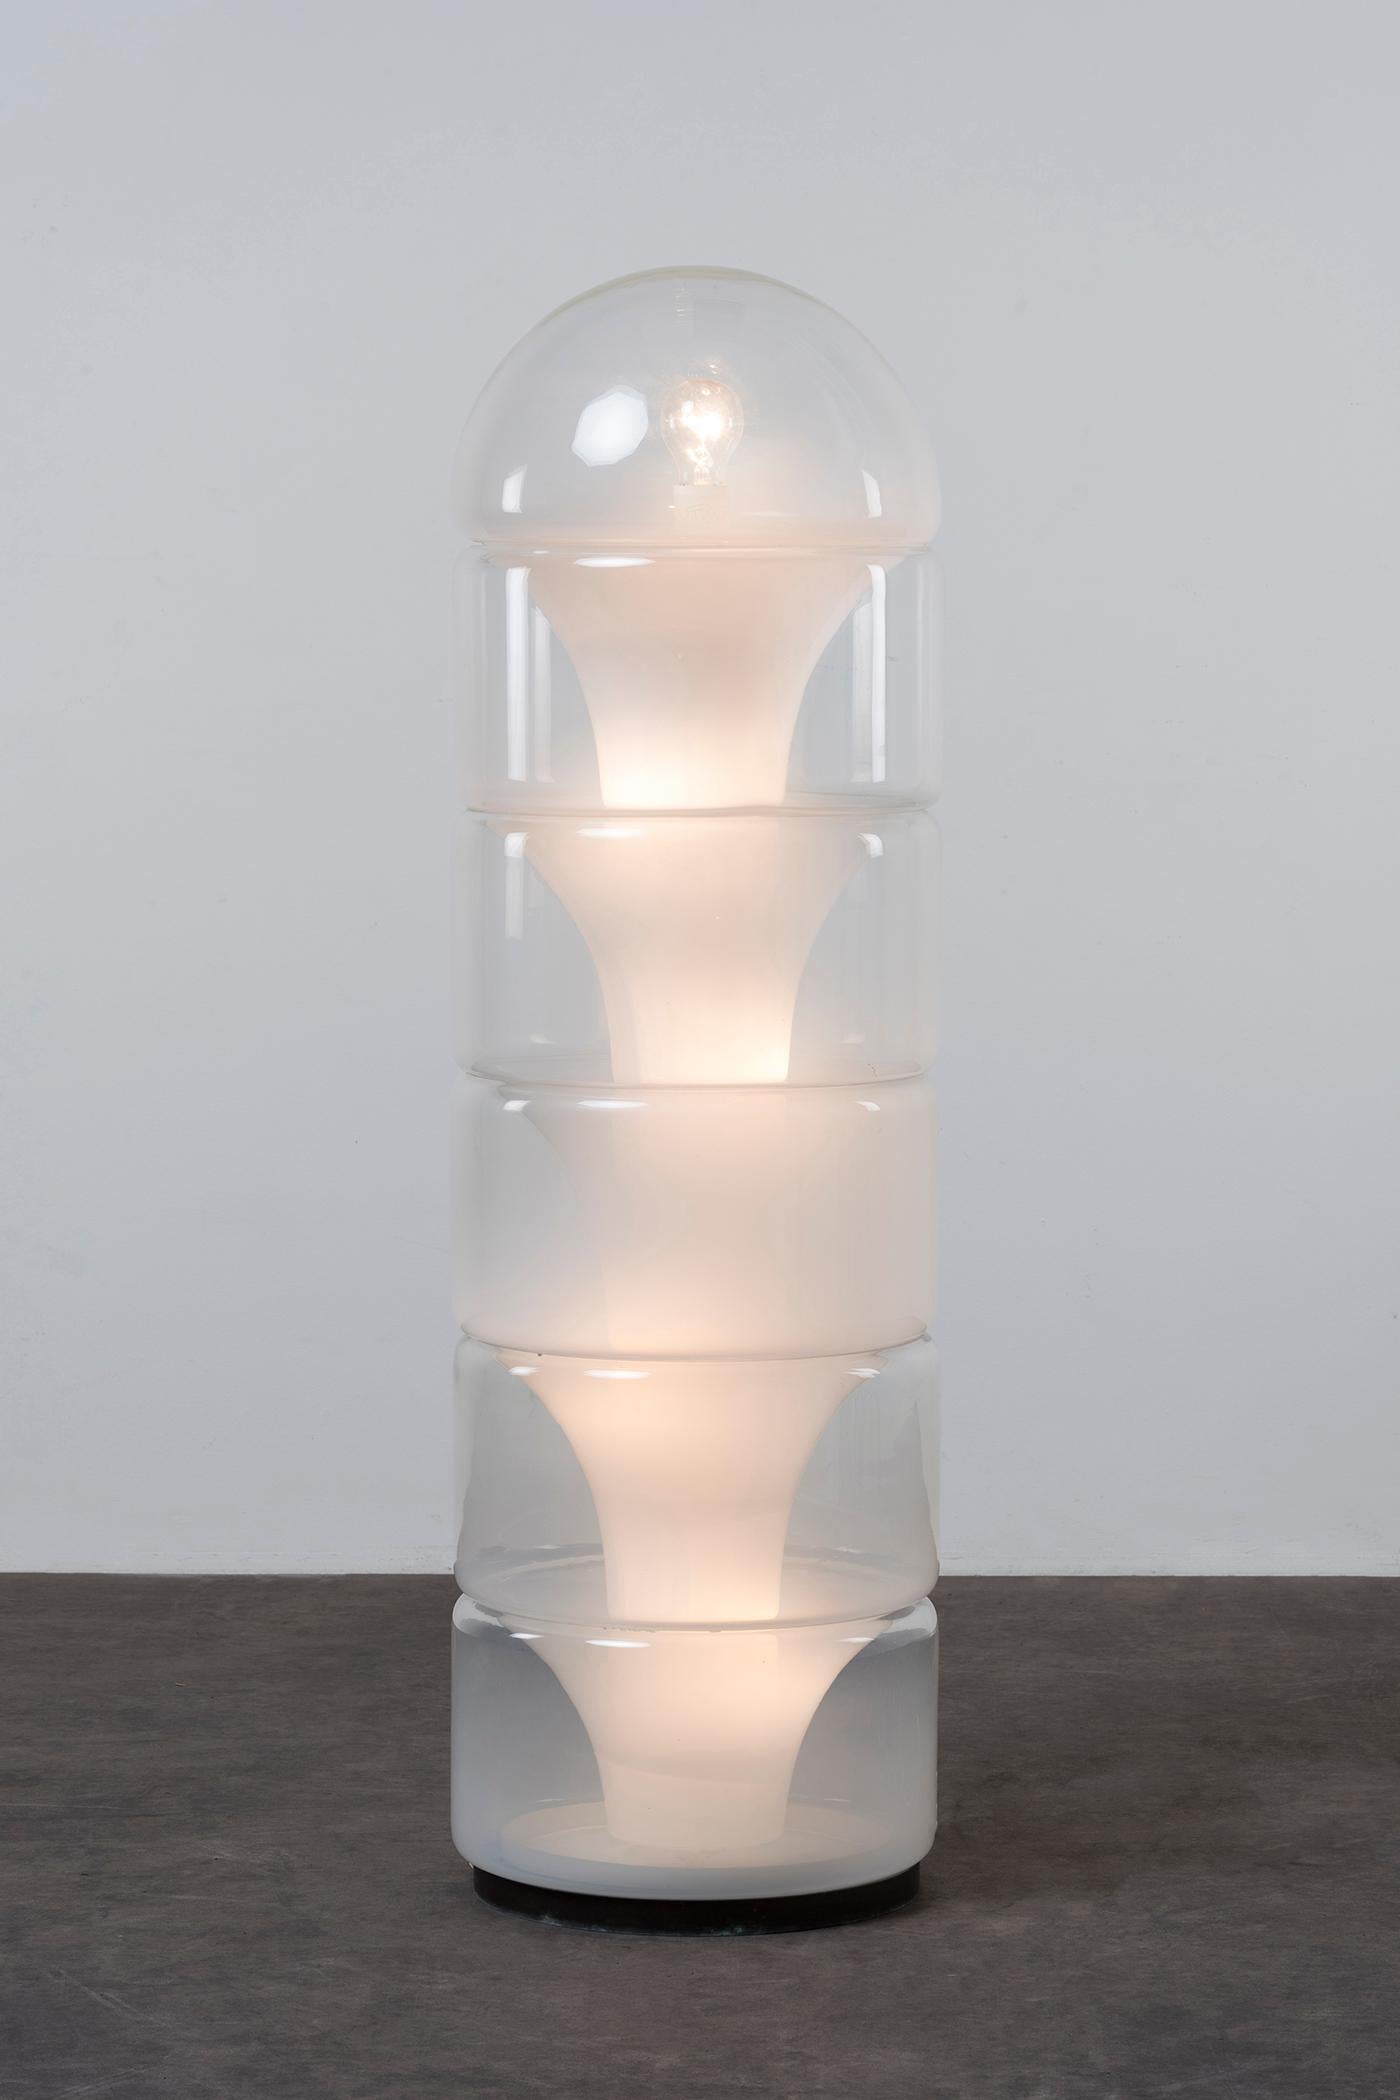 Paracarro floor lamp by Mazzega
Italy, 1960s. Manufactured by Mazzega. Opalescent blown glass. Measures: D 33 x H 117 cm. D 46 x H 13 in.
Please note: Prices do not include VAT. VAT may be applied depending on the ship-to location.